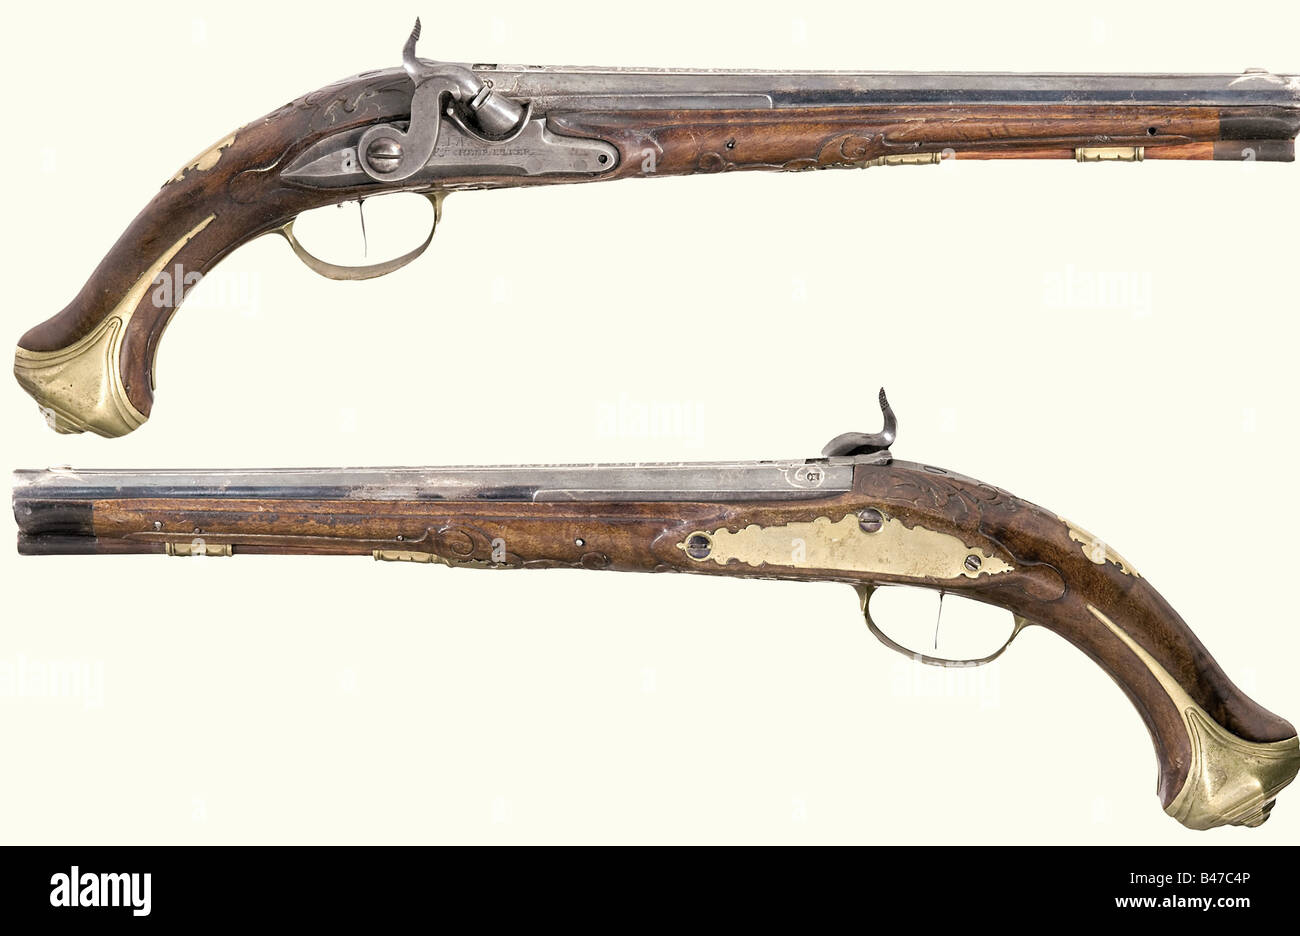 A pair of percussion pistols, Johann Andreas Kuchenreuter, Steinweg bei Regensburg, circa 1780. Blued, smooth bore barrels in 12 mm calibre. Silver front sights and a silver-inlaid signature on the sighting flats. There are four silver-filled marks between inlaid scroll decorations on each of the breeches. The tangs are inscribed '1' and '2'. Converted locks with engraved signature. Set triggers. Lightly carved walnut fullstocks. Blank brass escutcheons with the monogram 'AM' stamped above them. Smooth brass furniture. Original wooden ramrods with horn tips. Le, Stock Photo